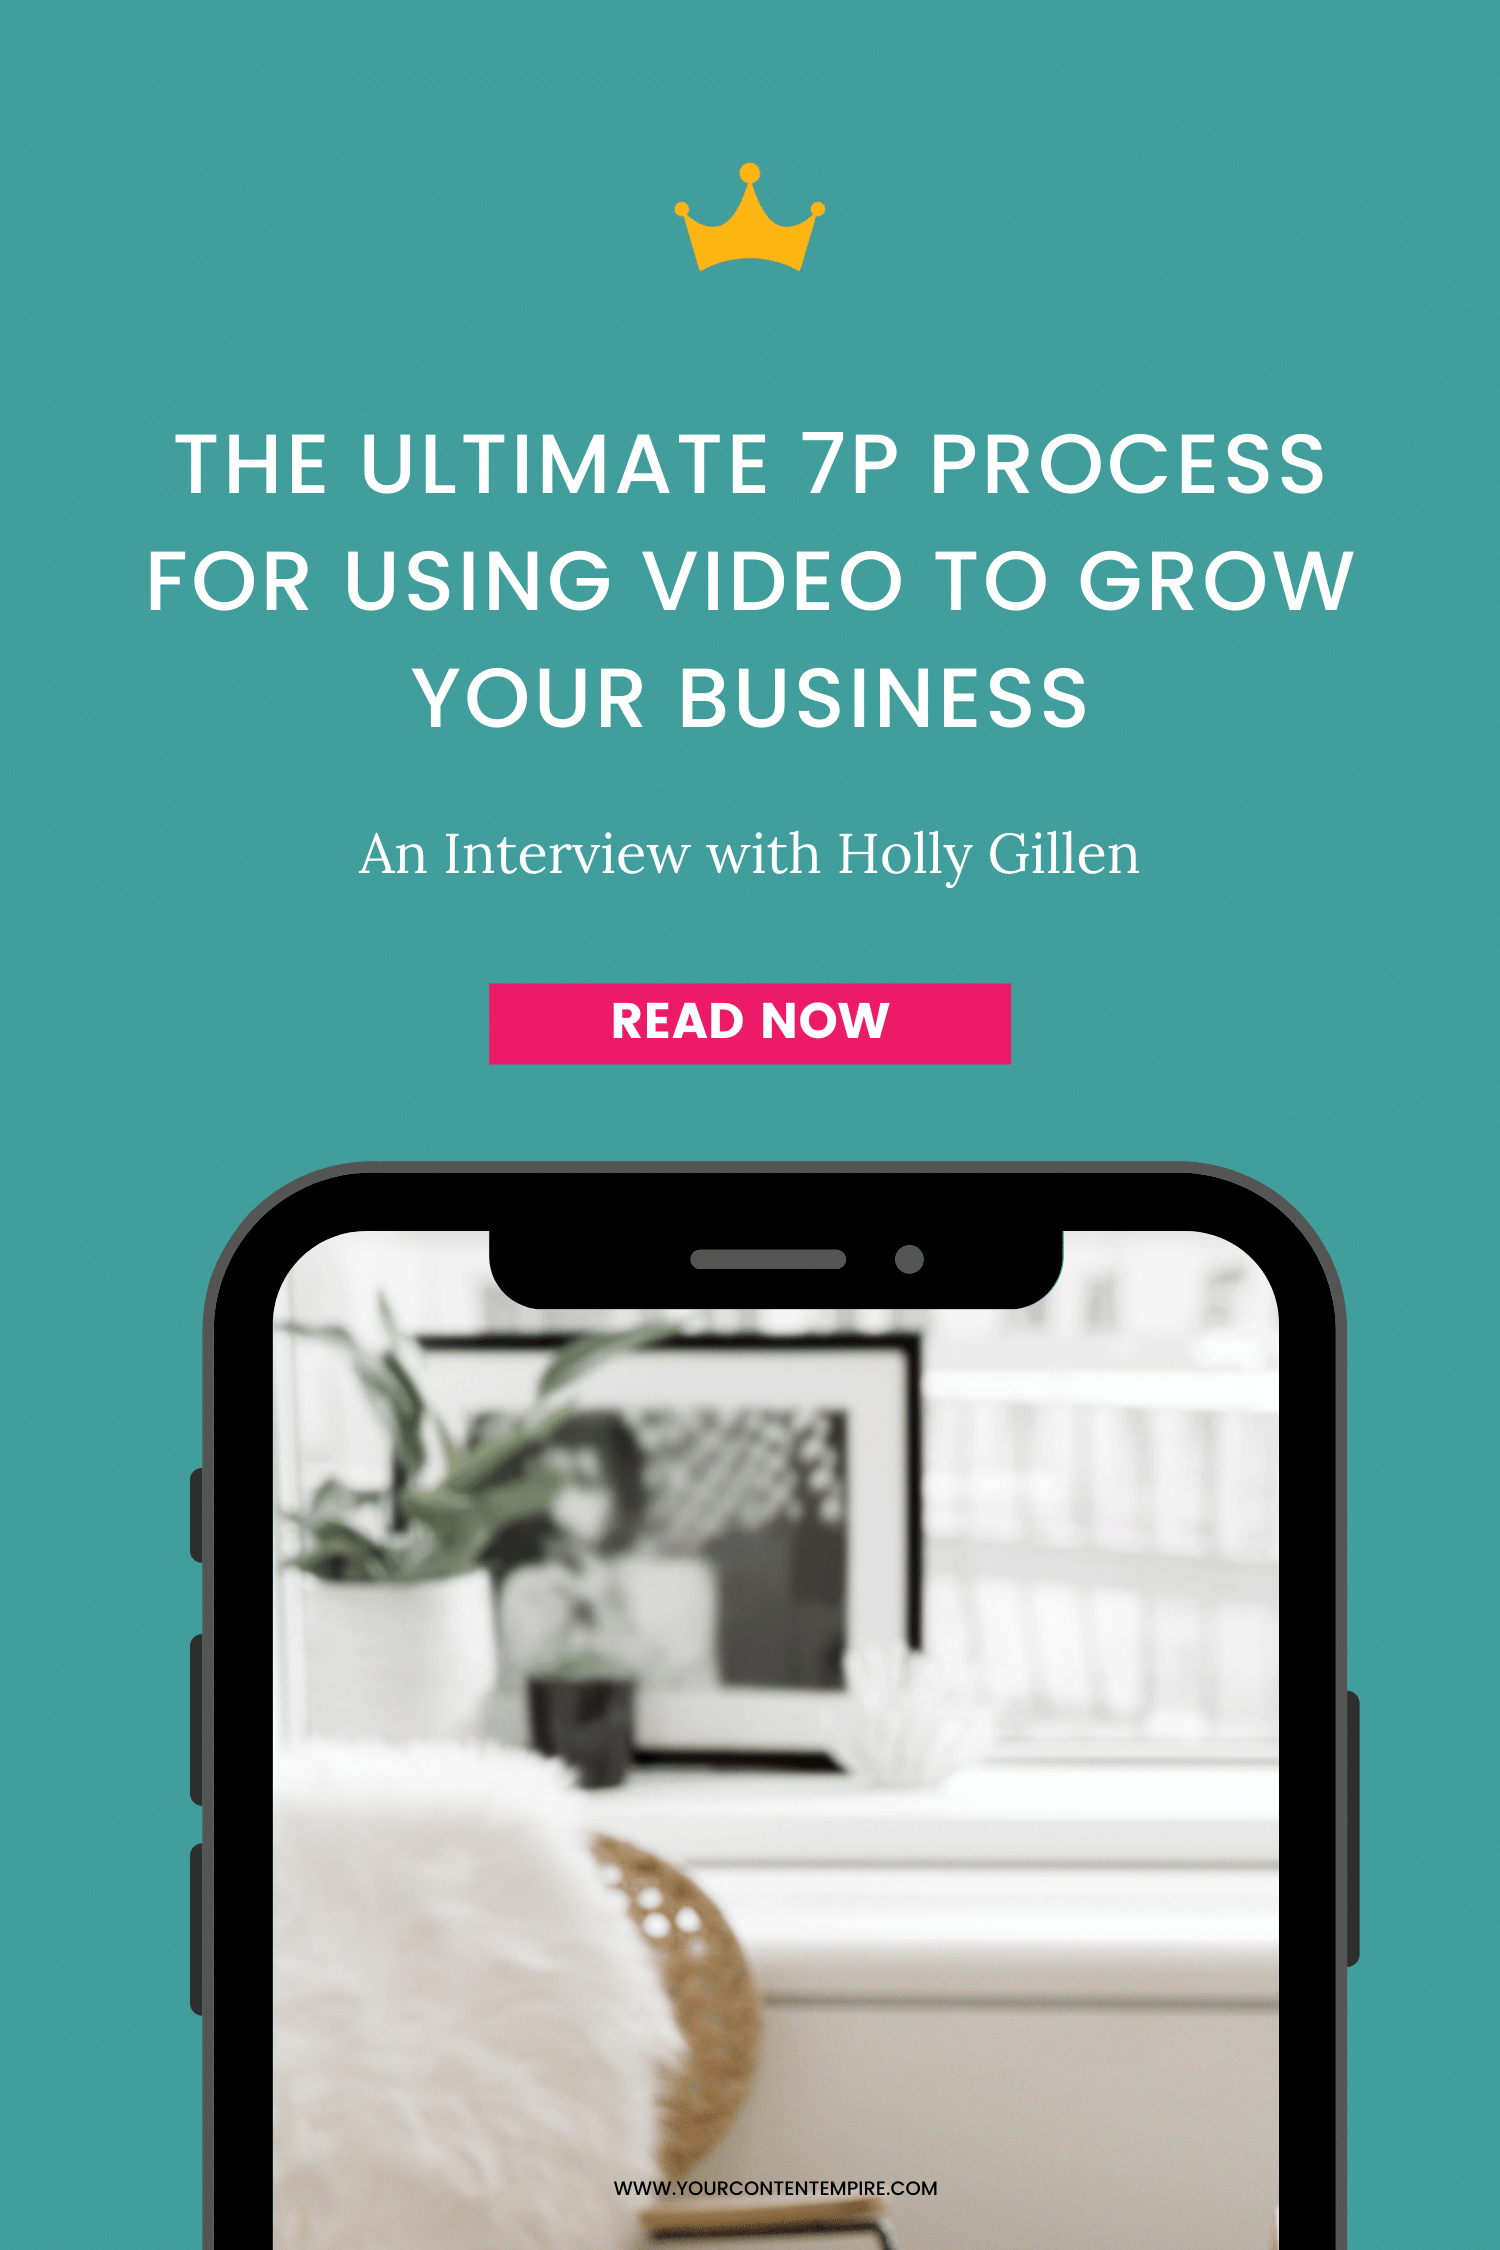 The Ultimate 7P Process for Using Video to Grow Your Business